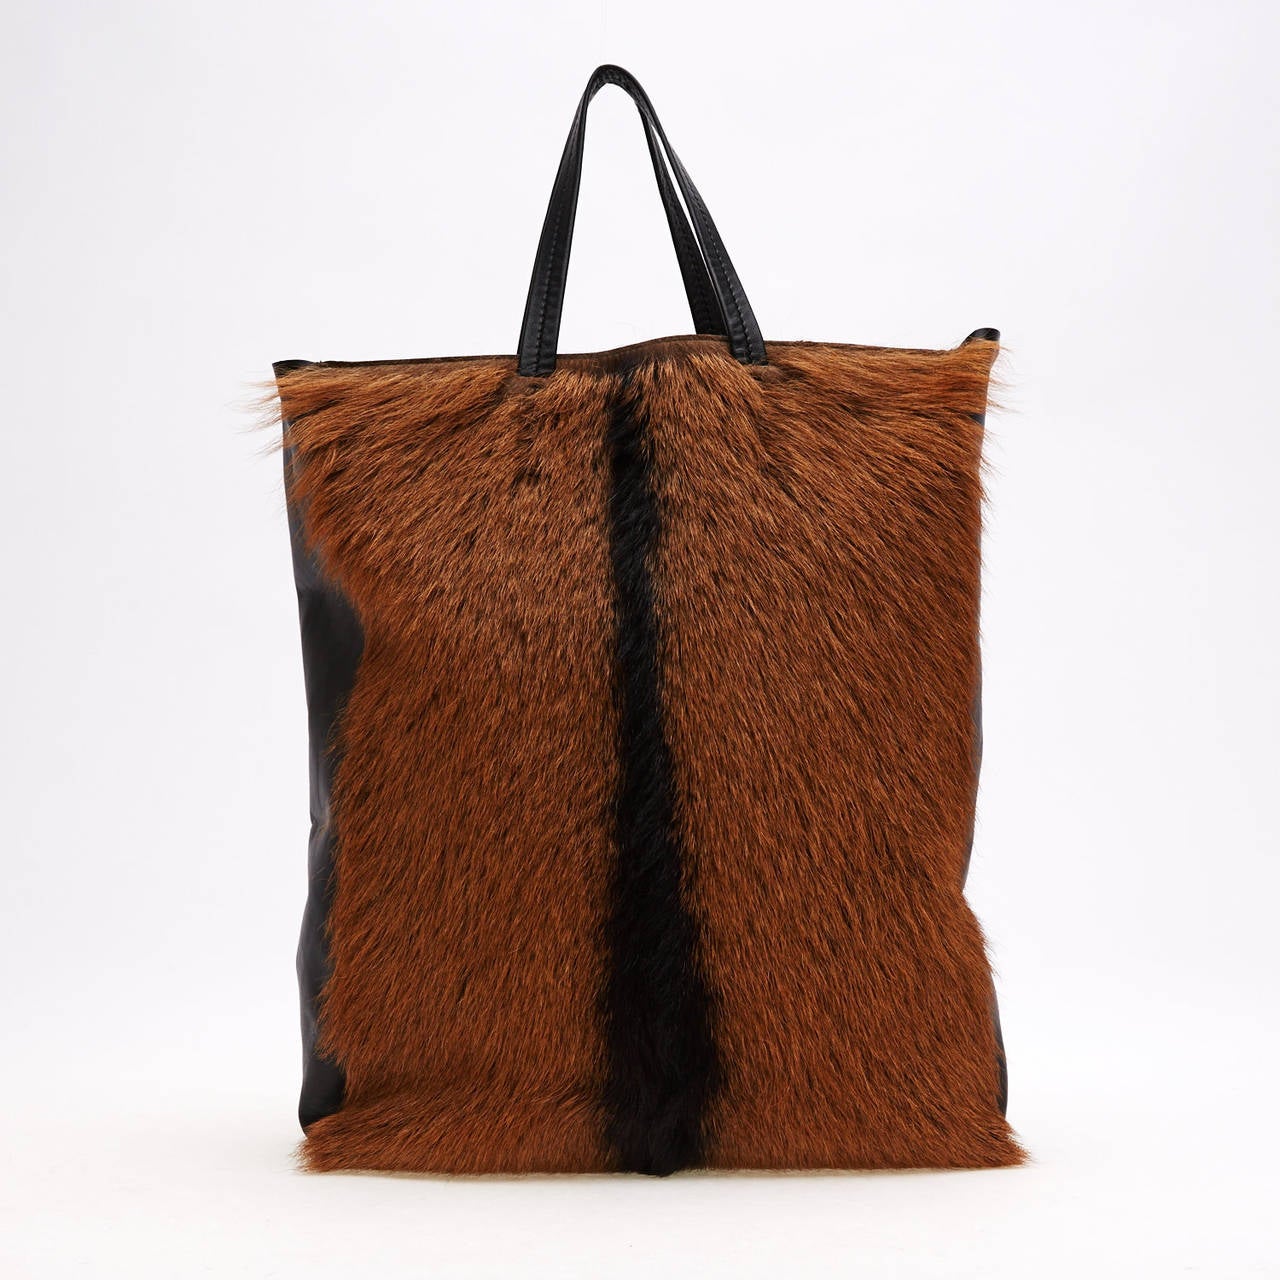 This stunning, rich Celine Cabas Fur Vertical Tote is sure to turn heads. This bag represents class and opulence. The rich soft brown and chocolate fur is paralleled with soft calfskin leather. The bag also features two leather handles and an